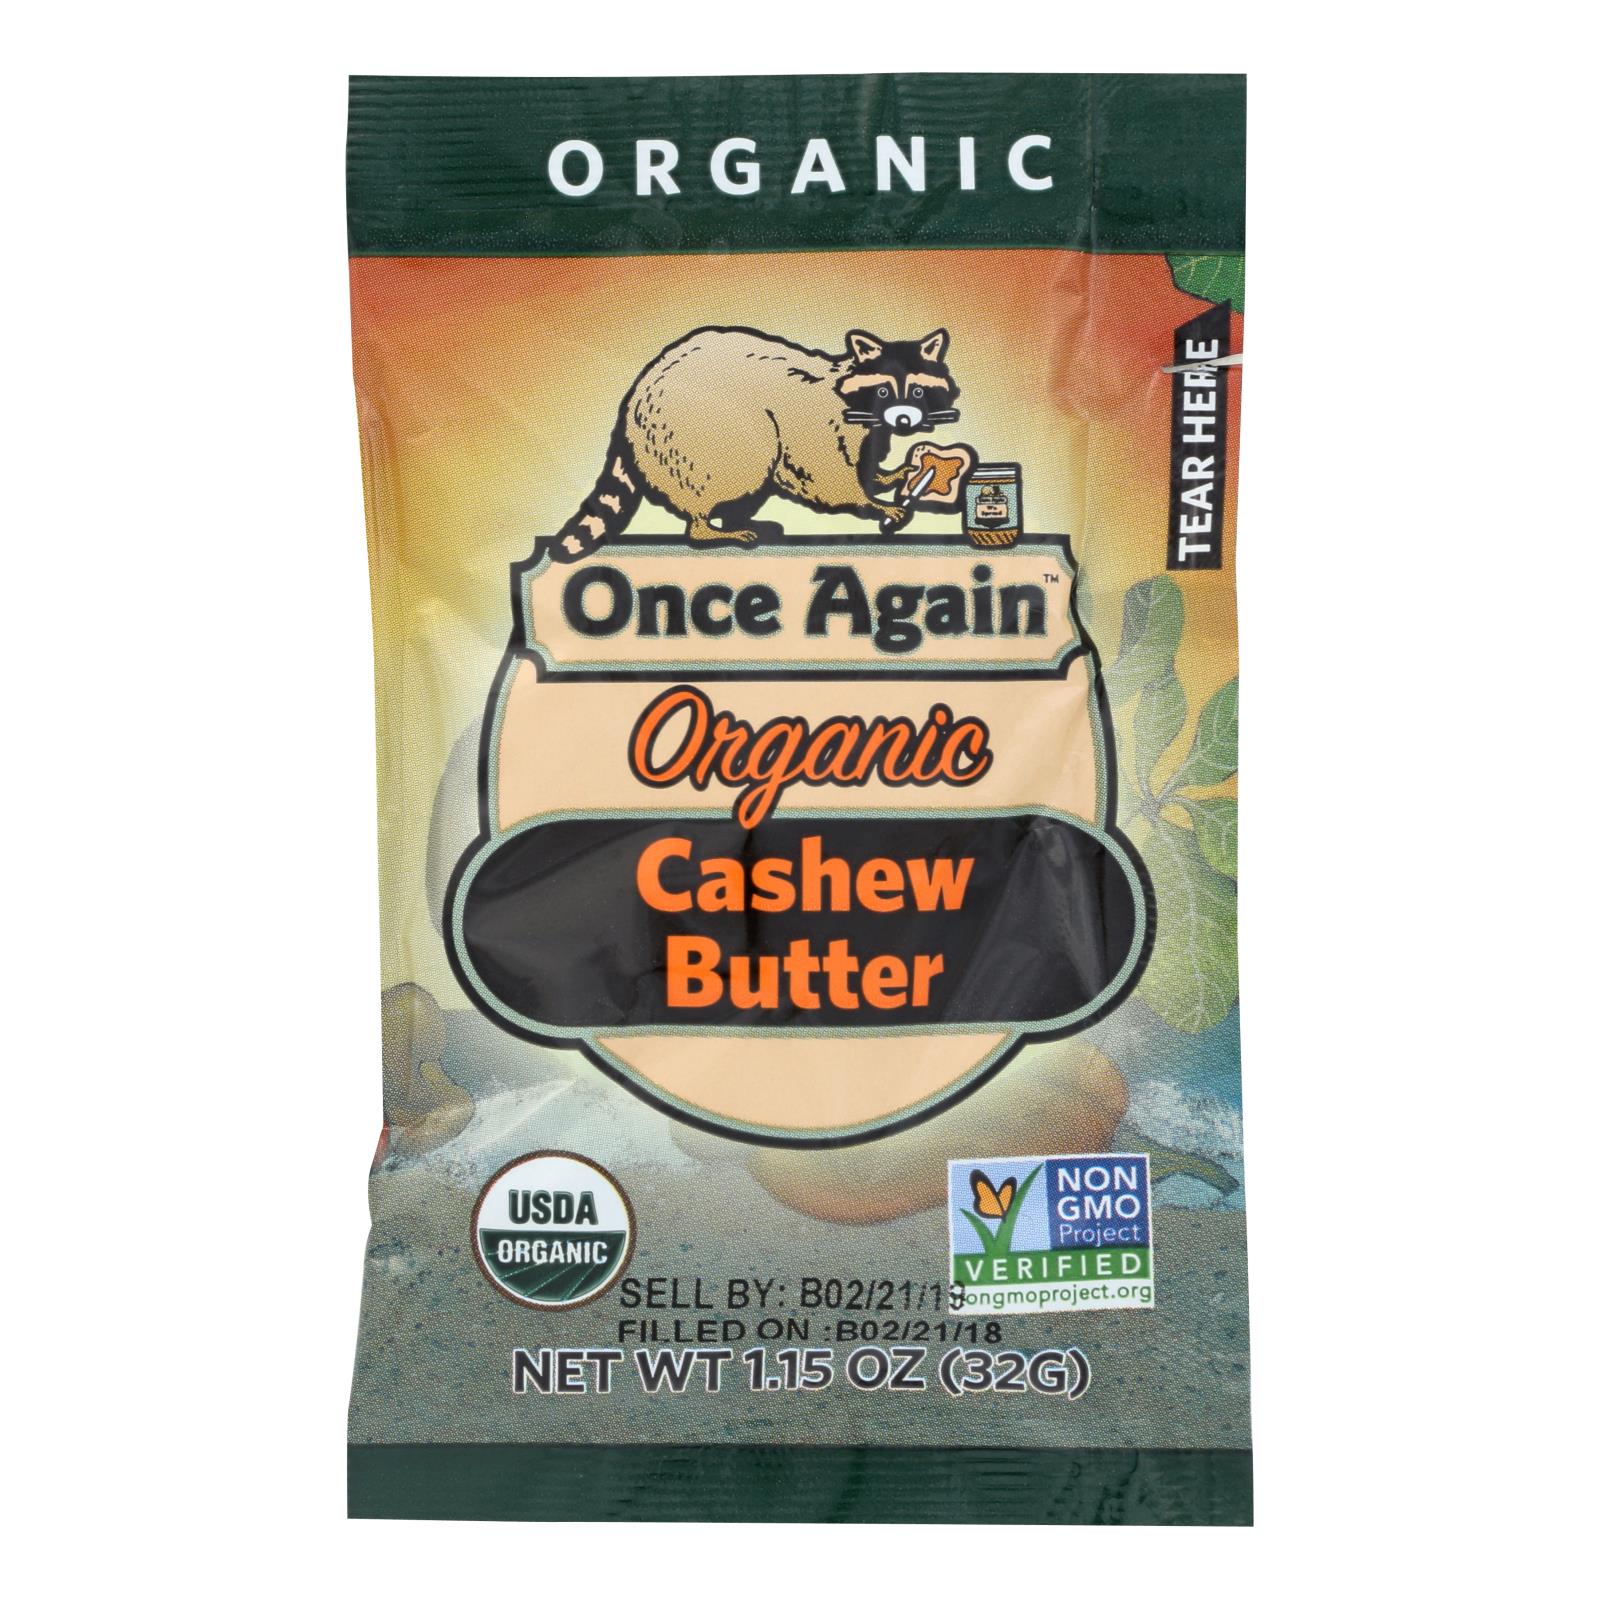 Once Again Organic Cashew Butter  - Case Of 10 - 1.15 Oz ($1.65/Count) - Whole Green Foods